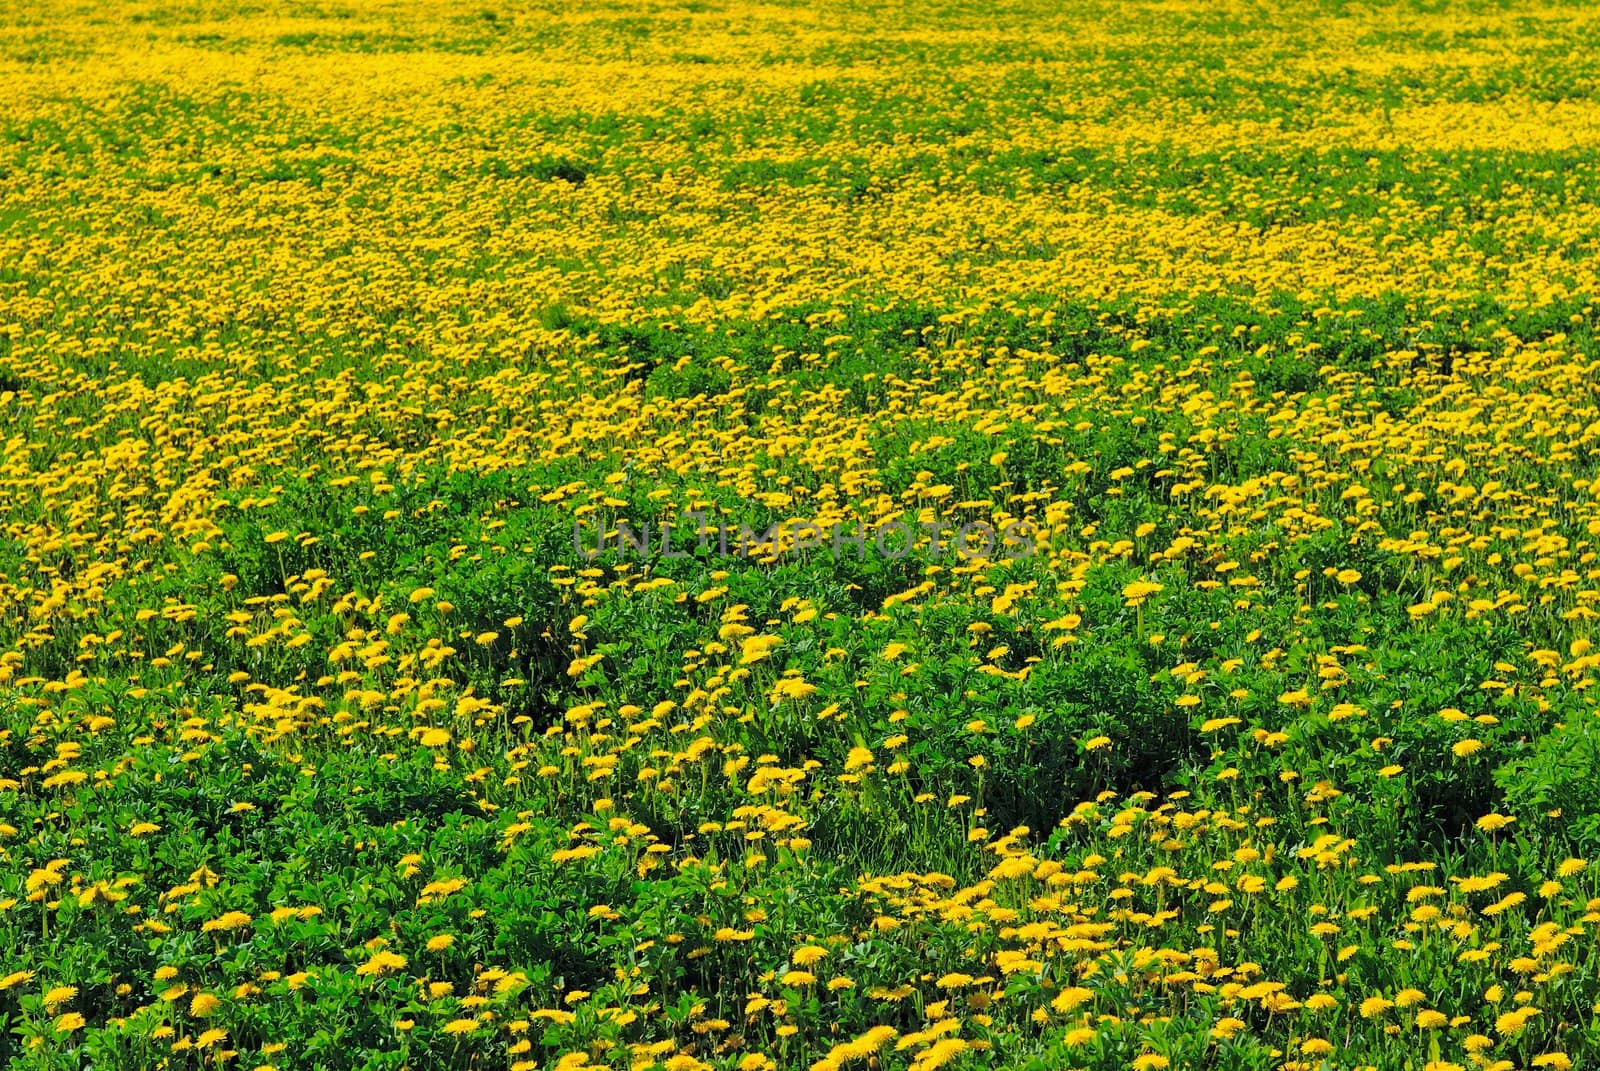 Flowering meadow with yellow flowers in summer